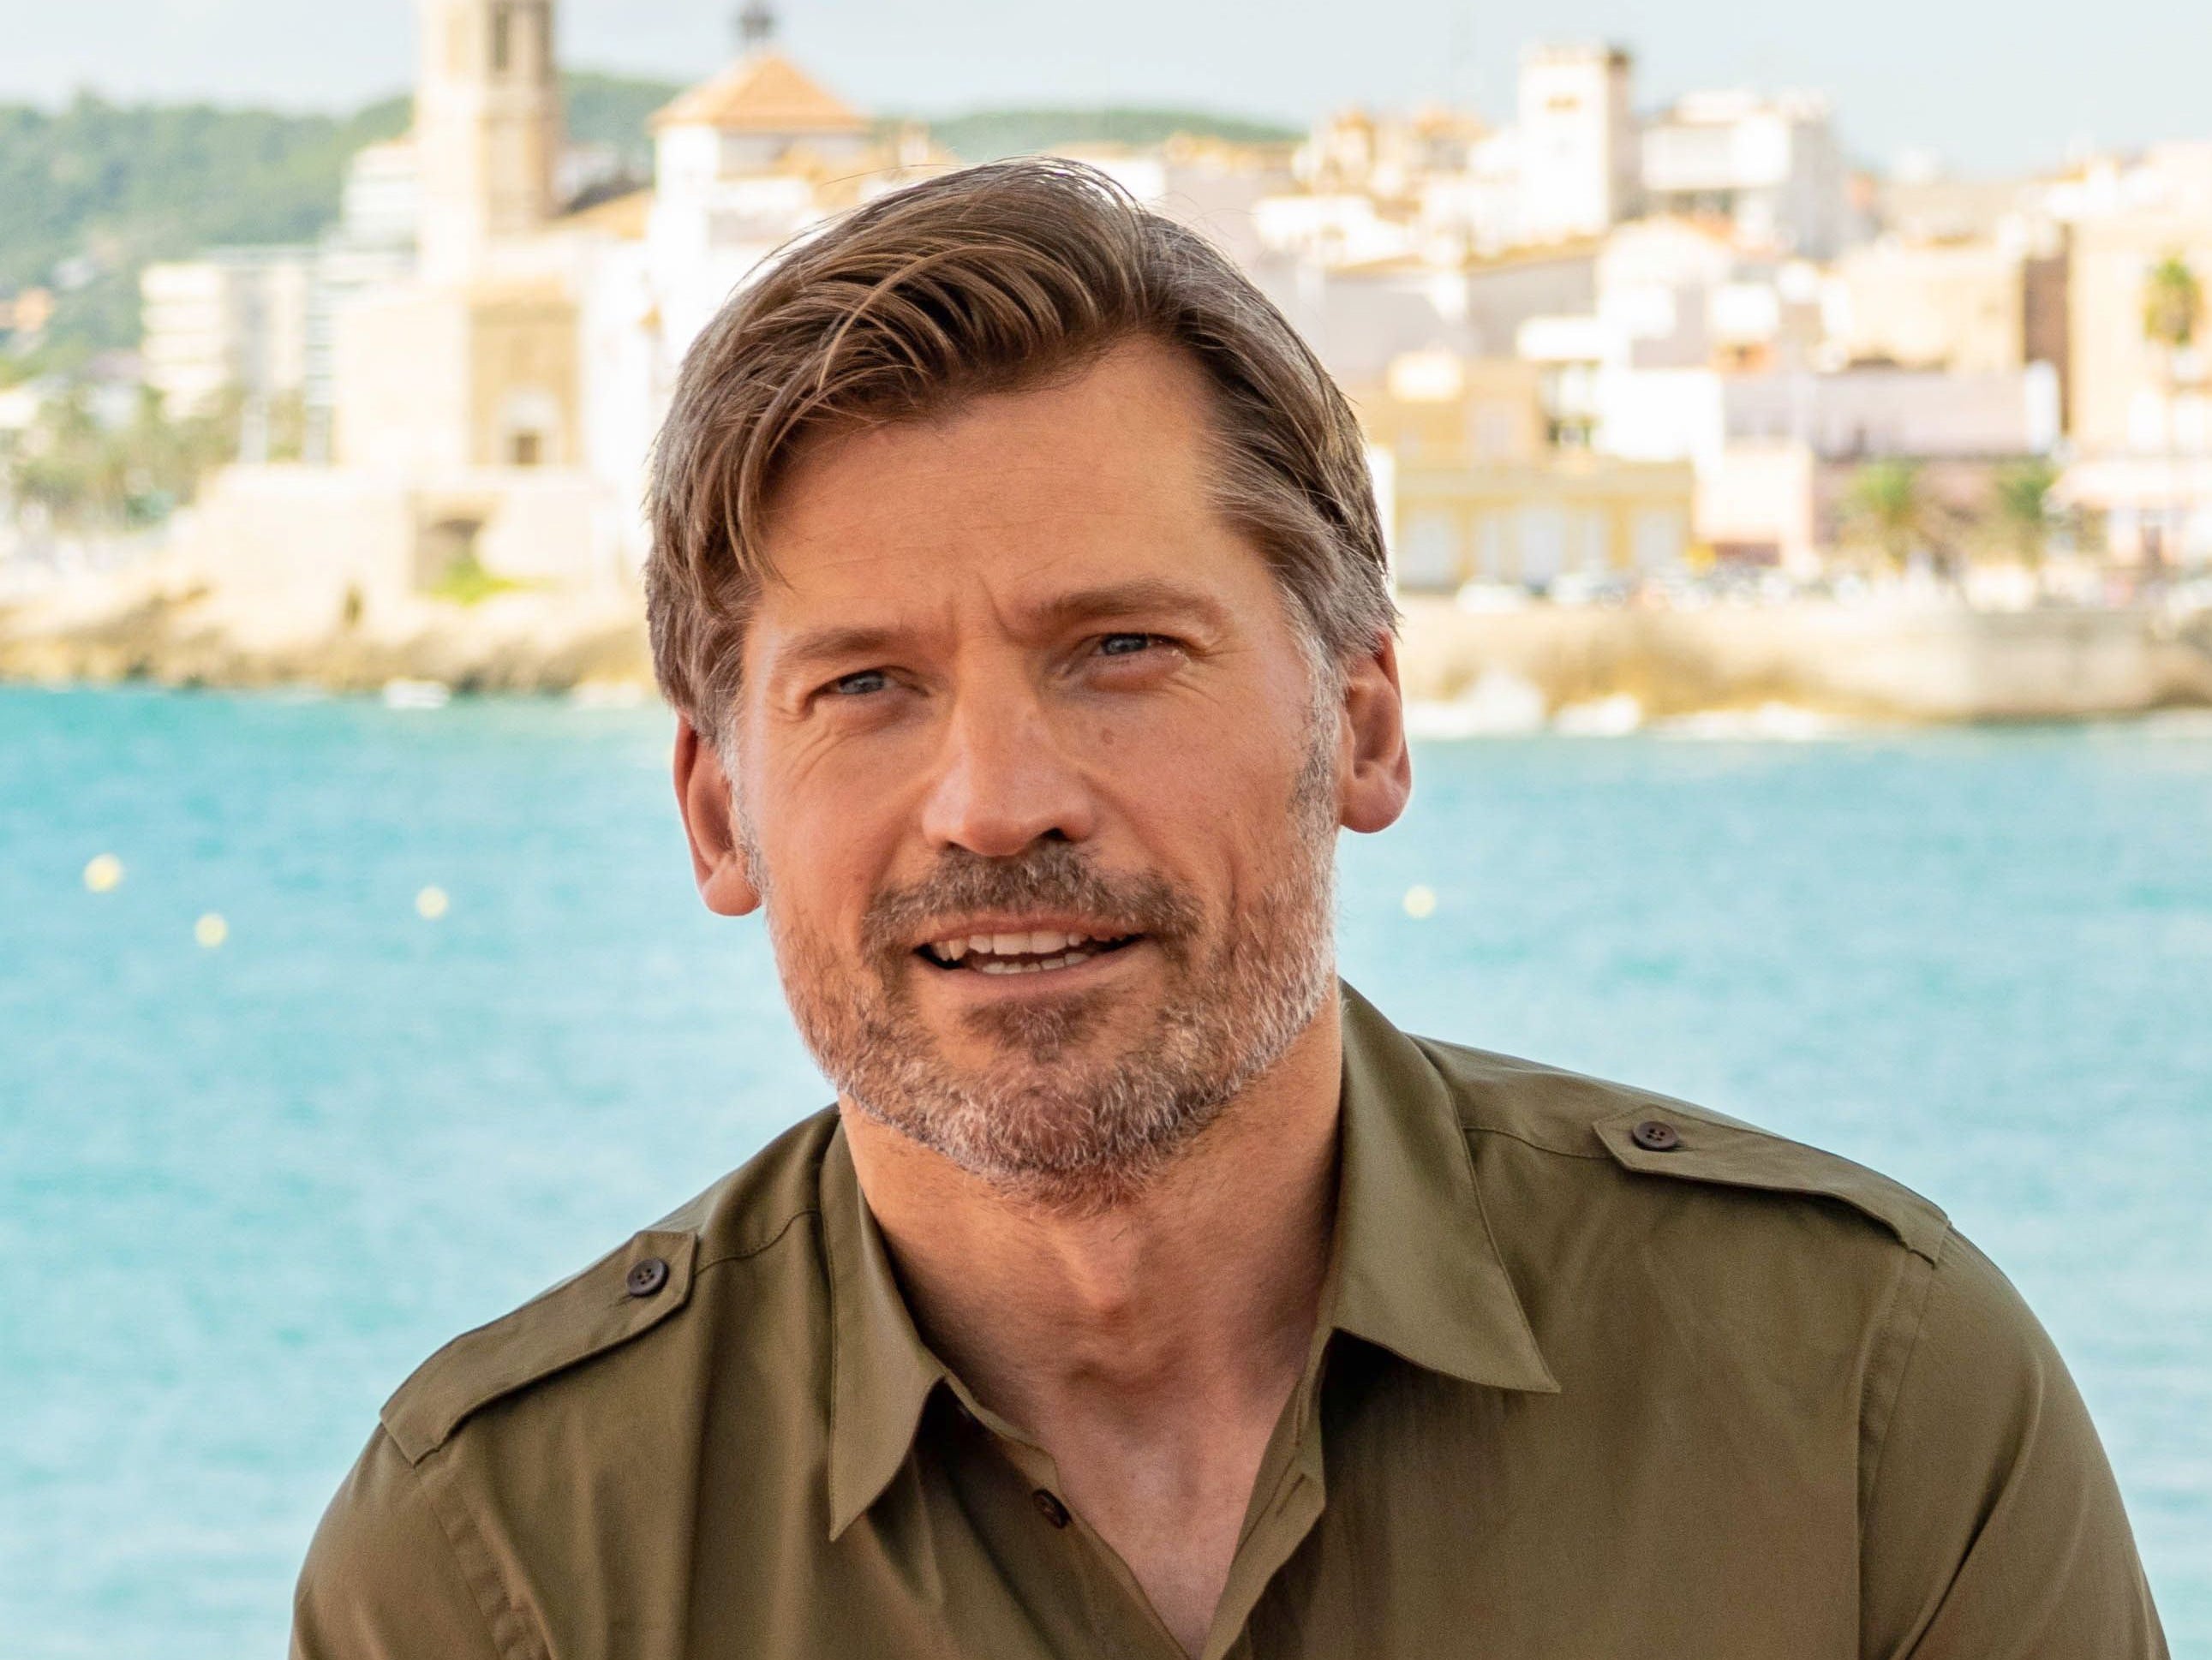 ‘In my world, those other jobs took up much more space than Jaime Lannister did’: Nikolaj Coster-Waldau talks life after ‘Game of Thrones’